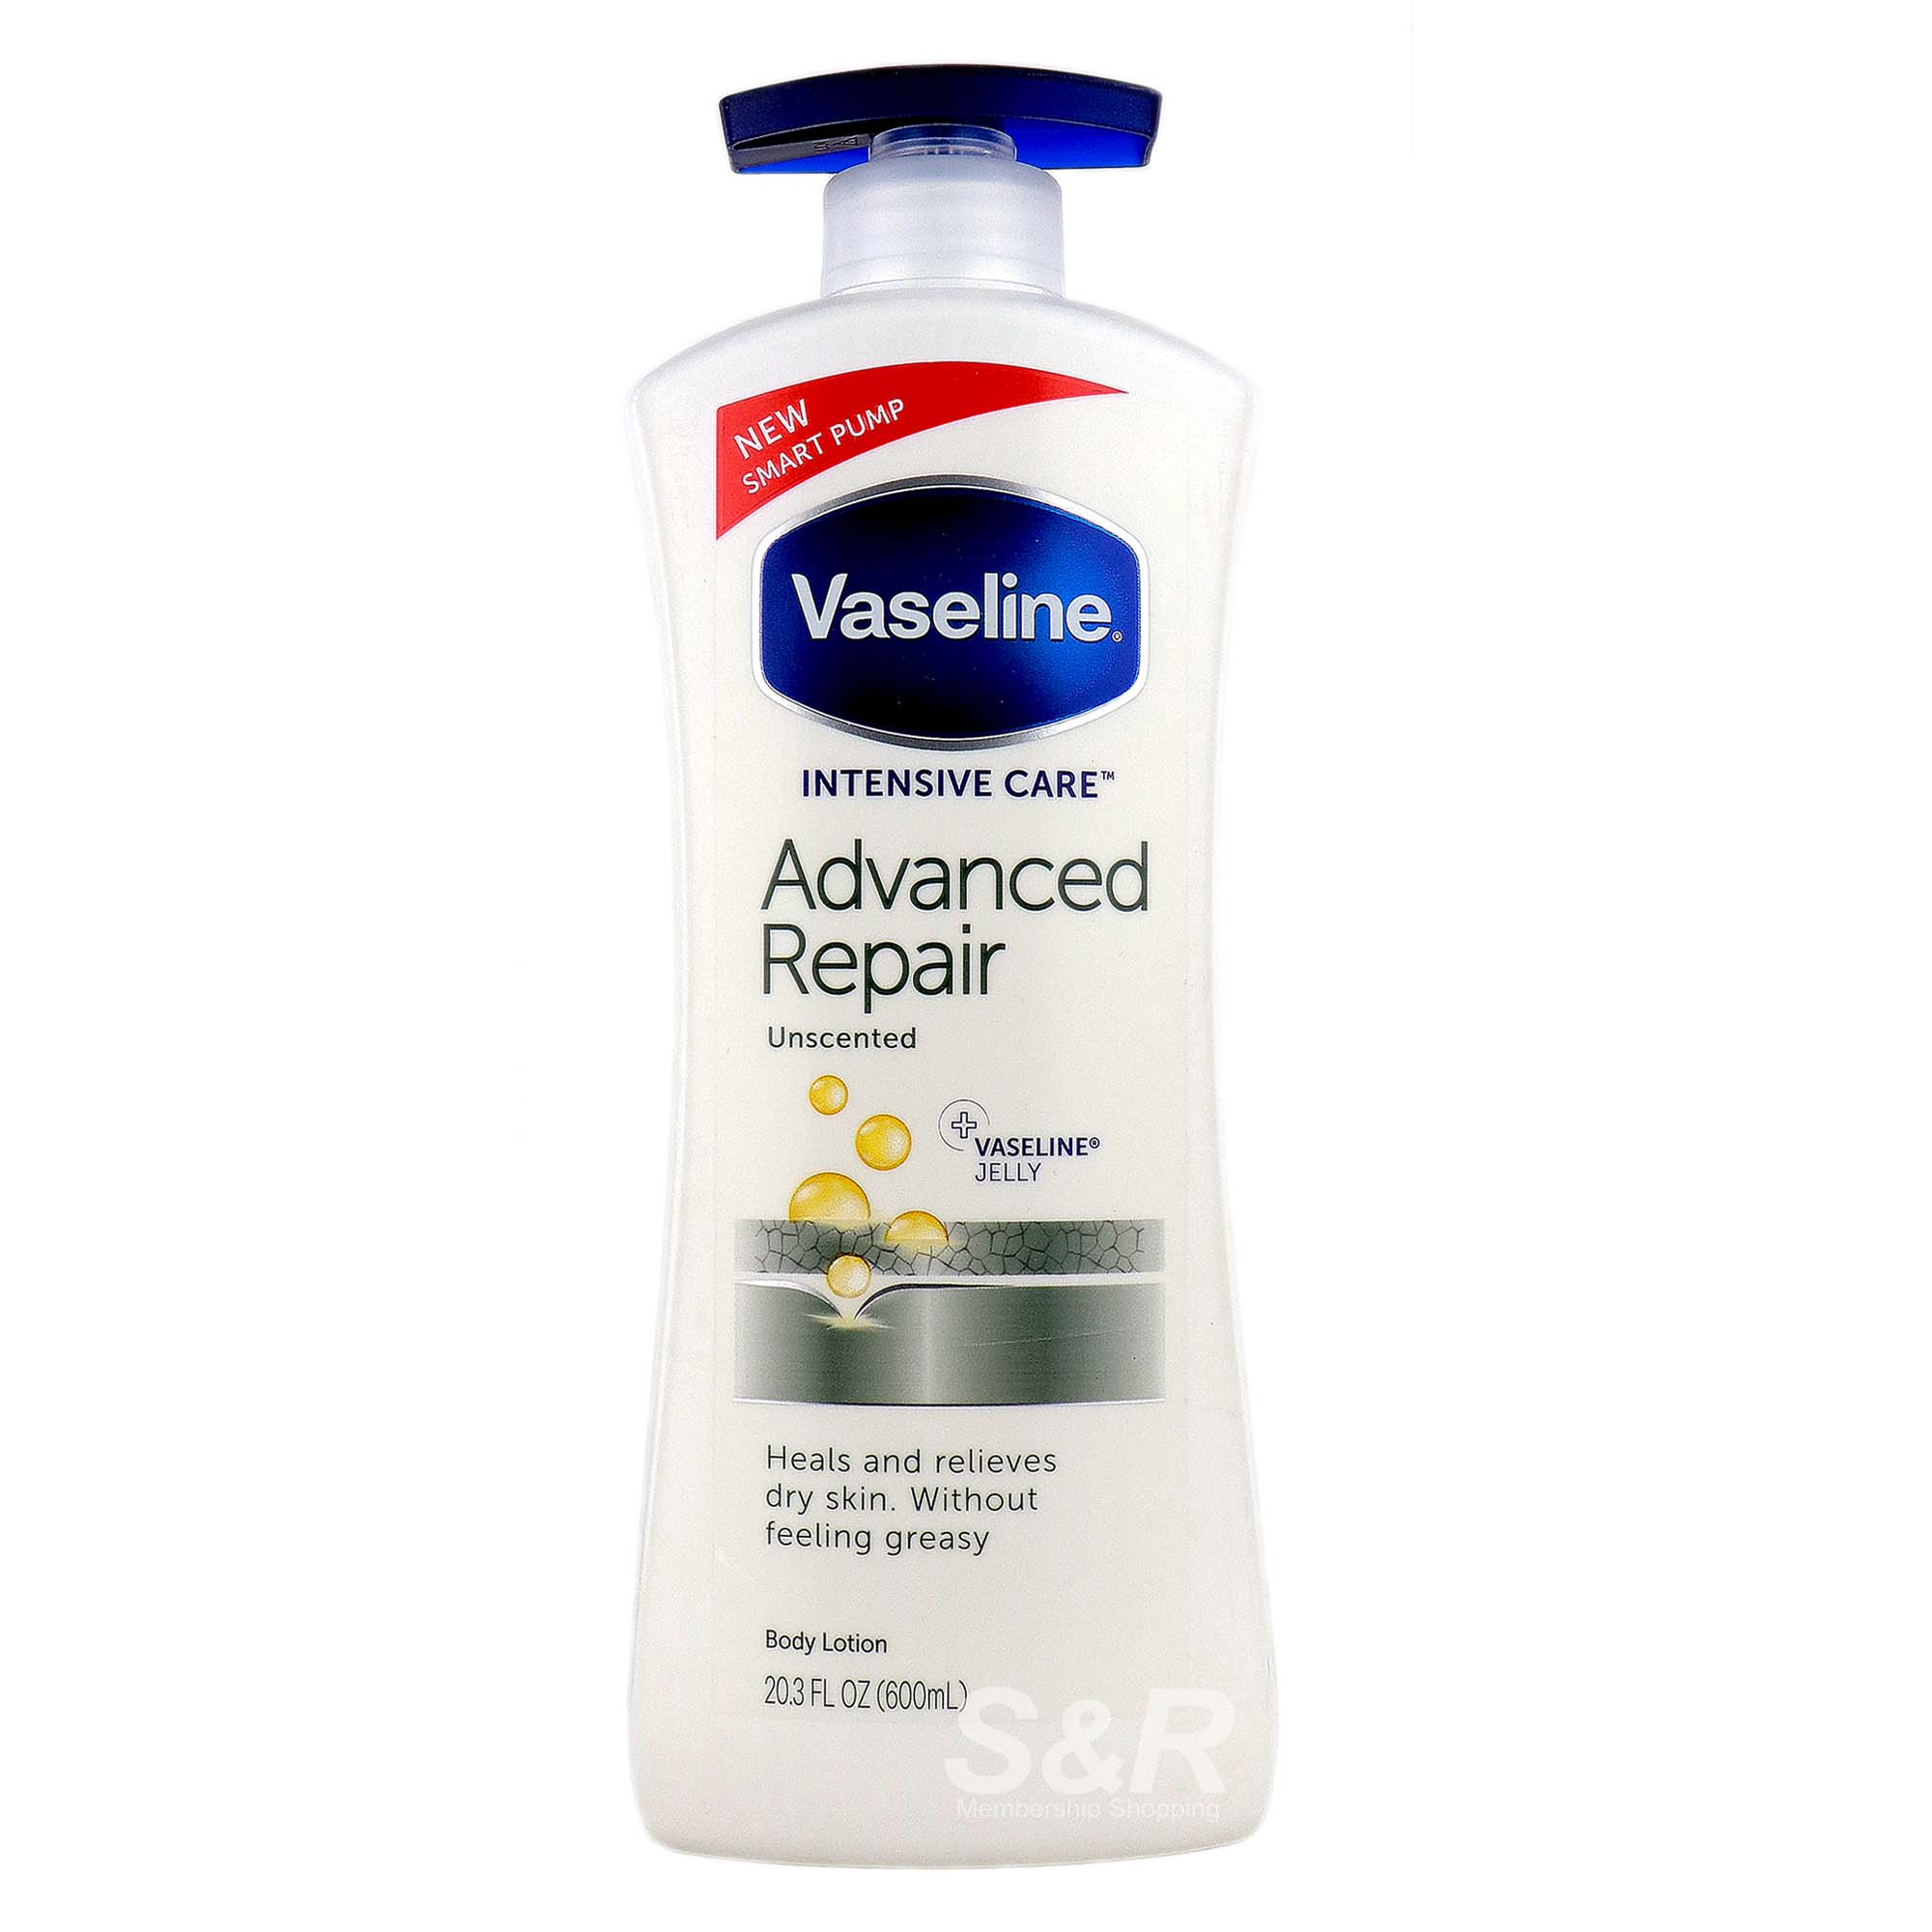 Vaseline Intensive Care Advanced Repair Unscented Body Lotion 600mL